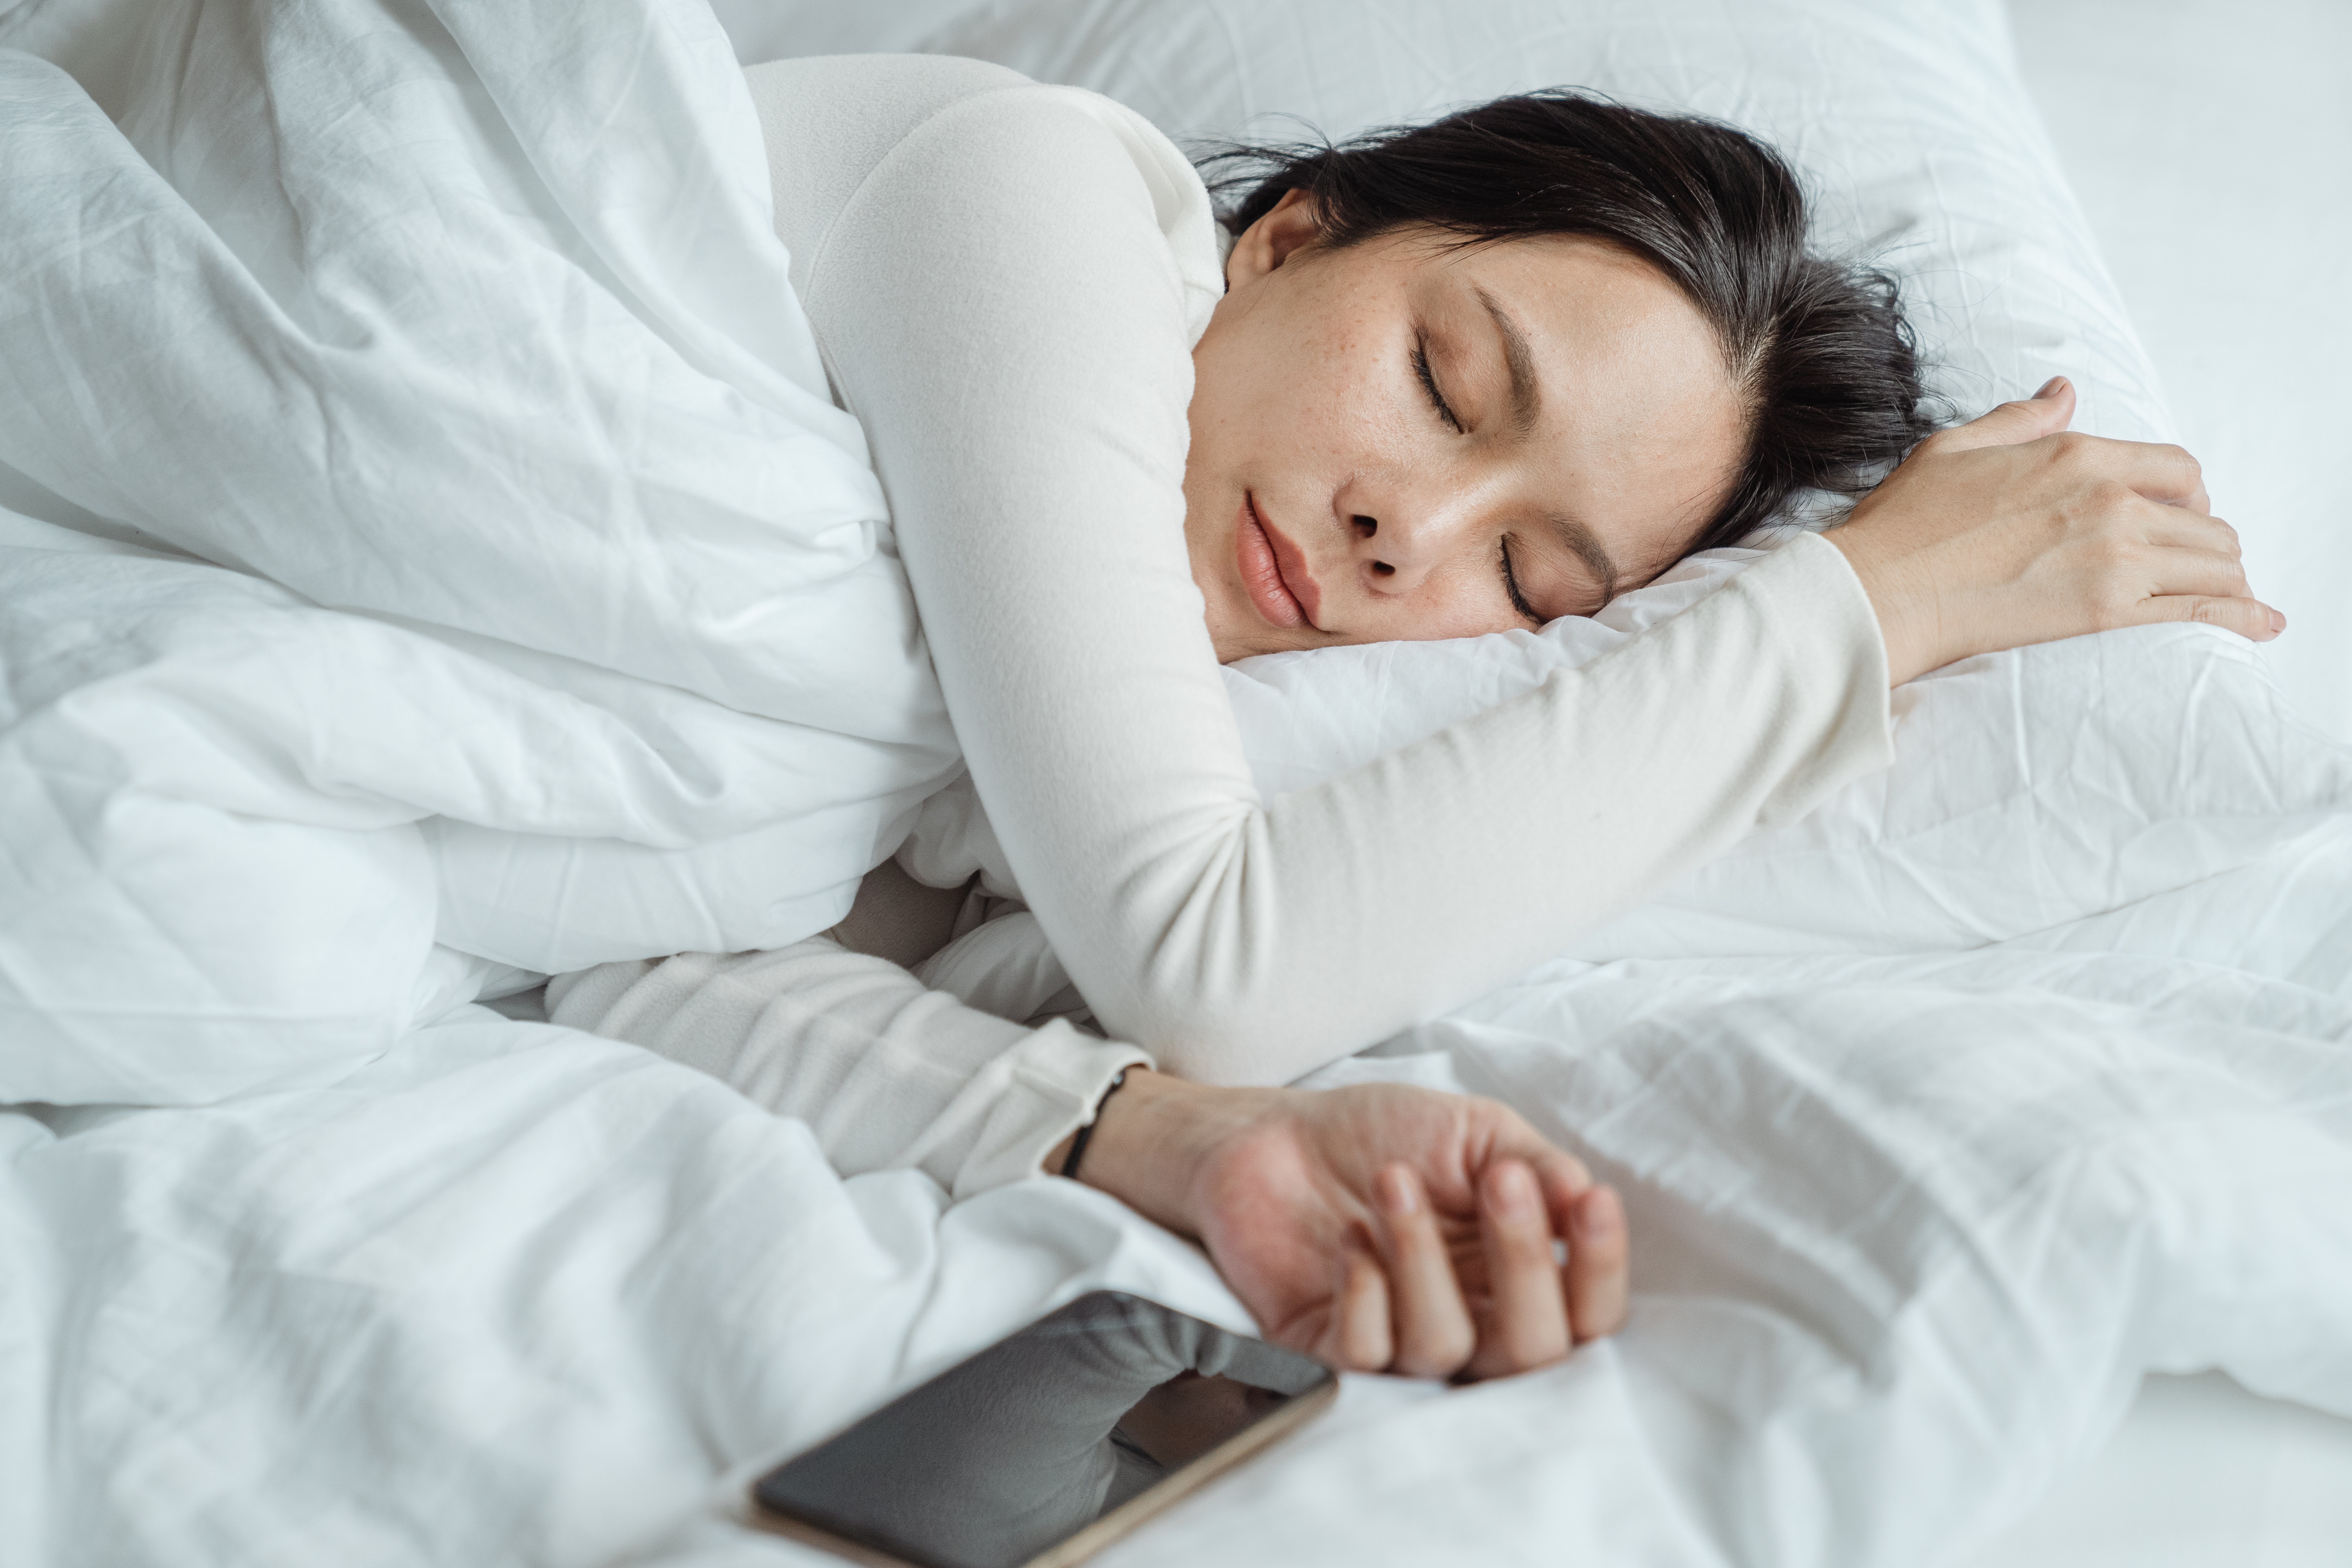 Woman sleeping on bed with phone next to her.